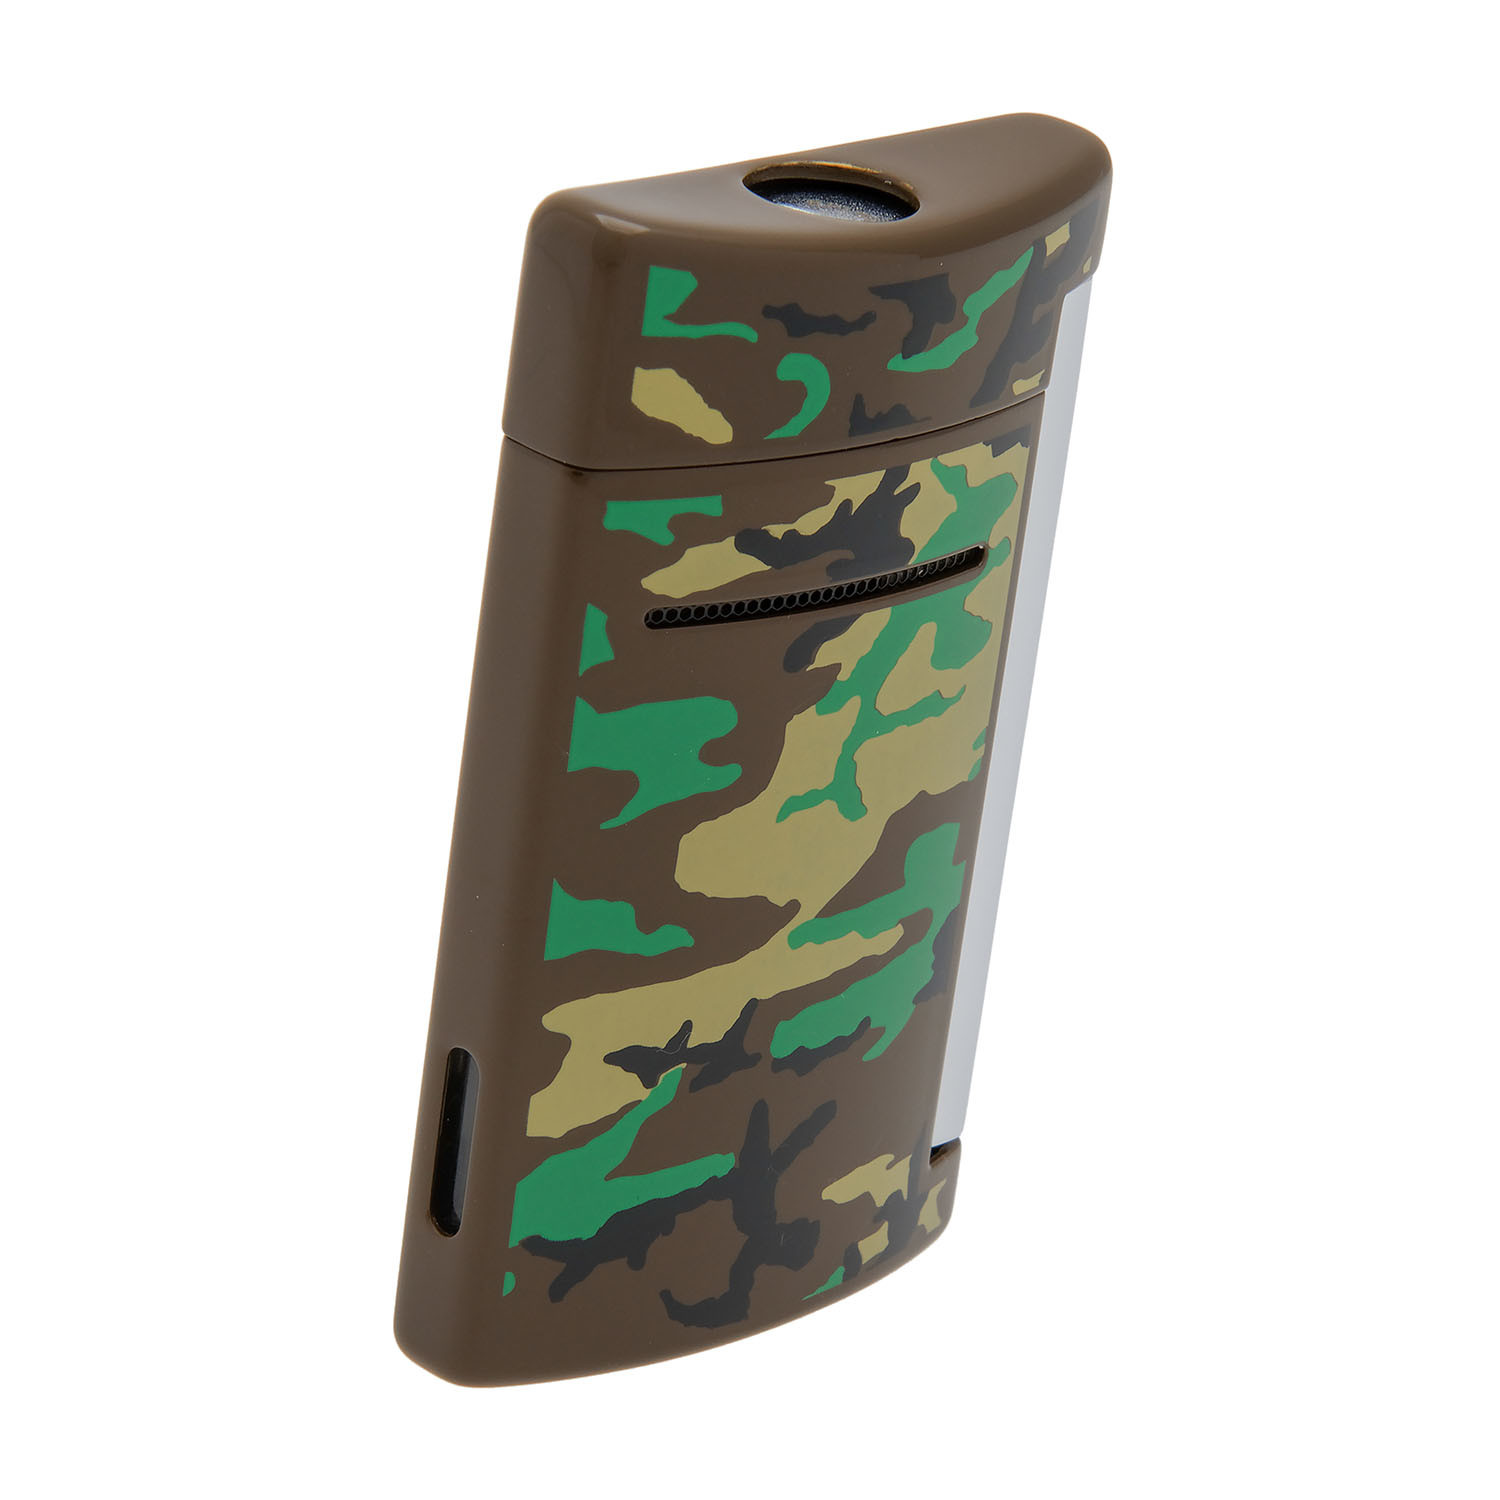 Minijet Woodland Camo Torch Lighter - S.T. Dupont - Touch of Modern